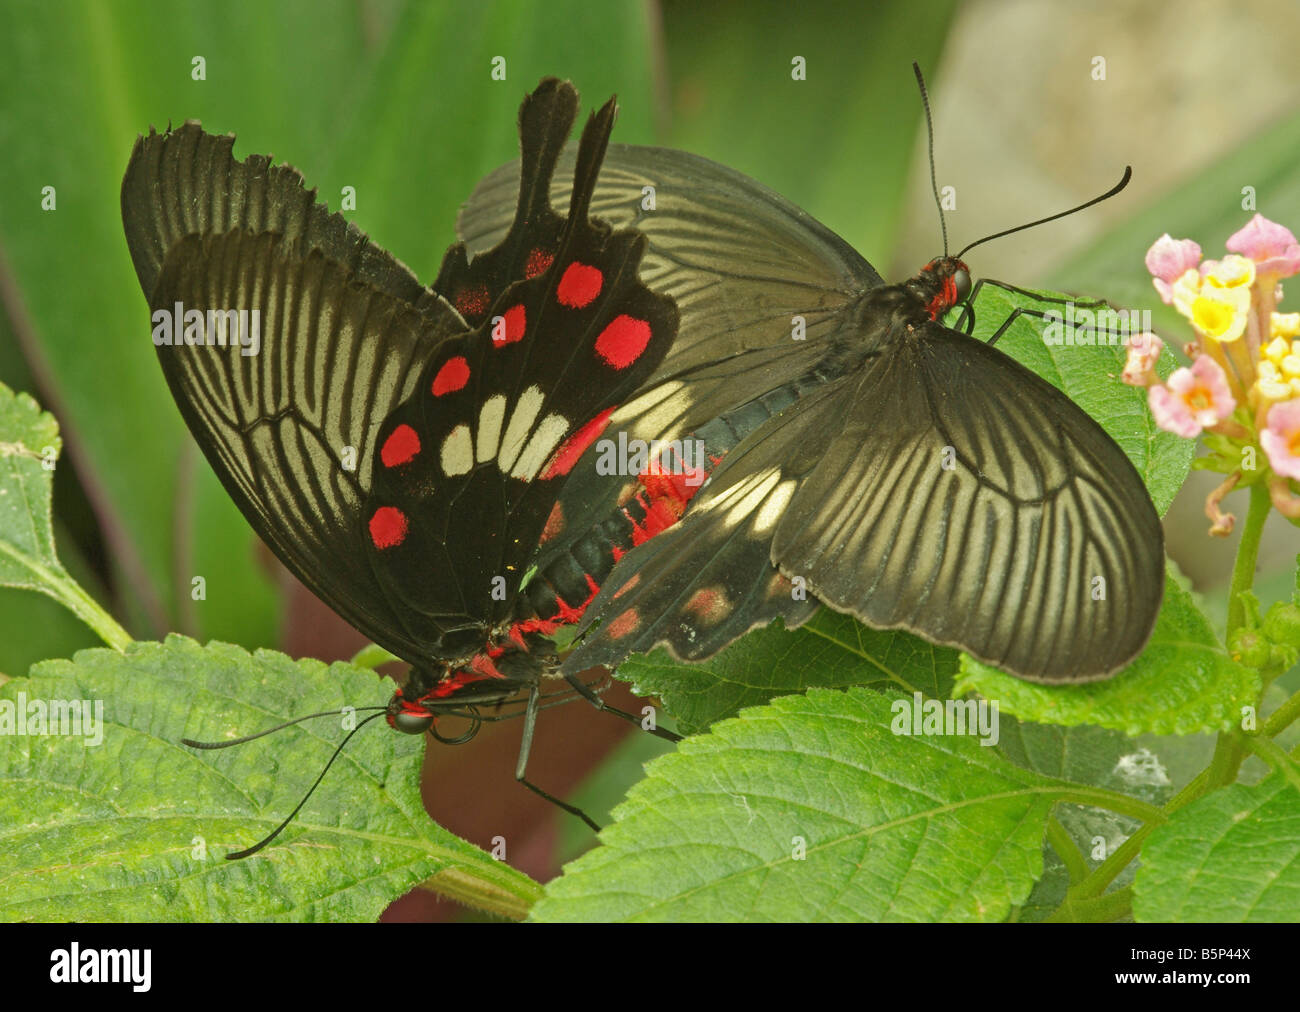 A mating pair of Papilio rumanzovia butterflies. Stock Photo